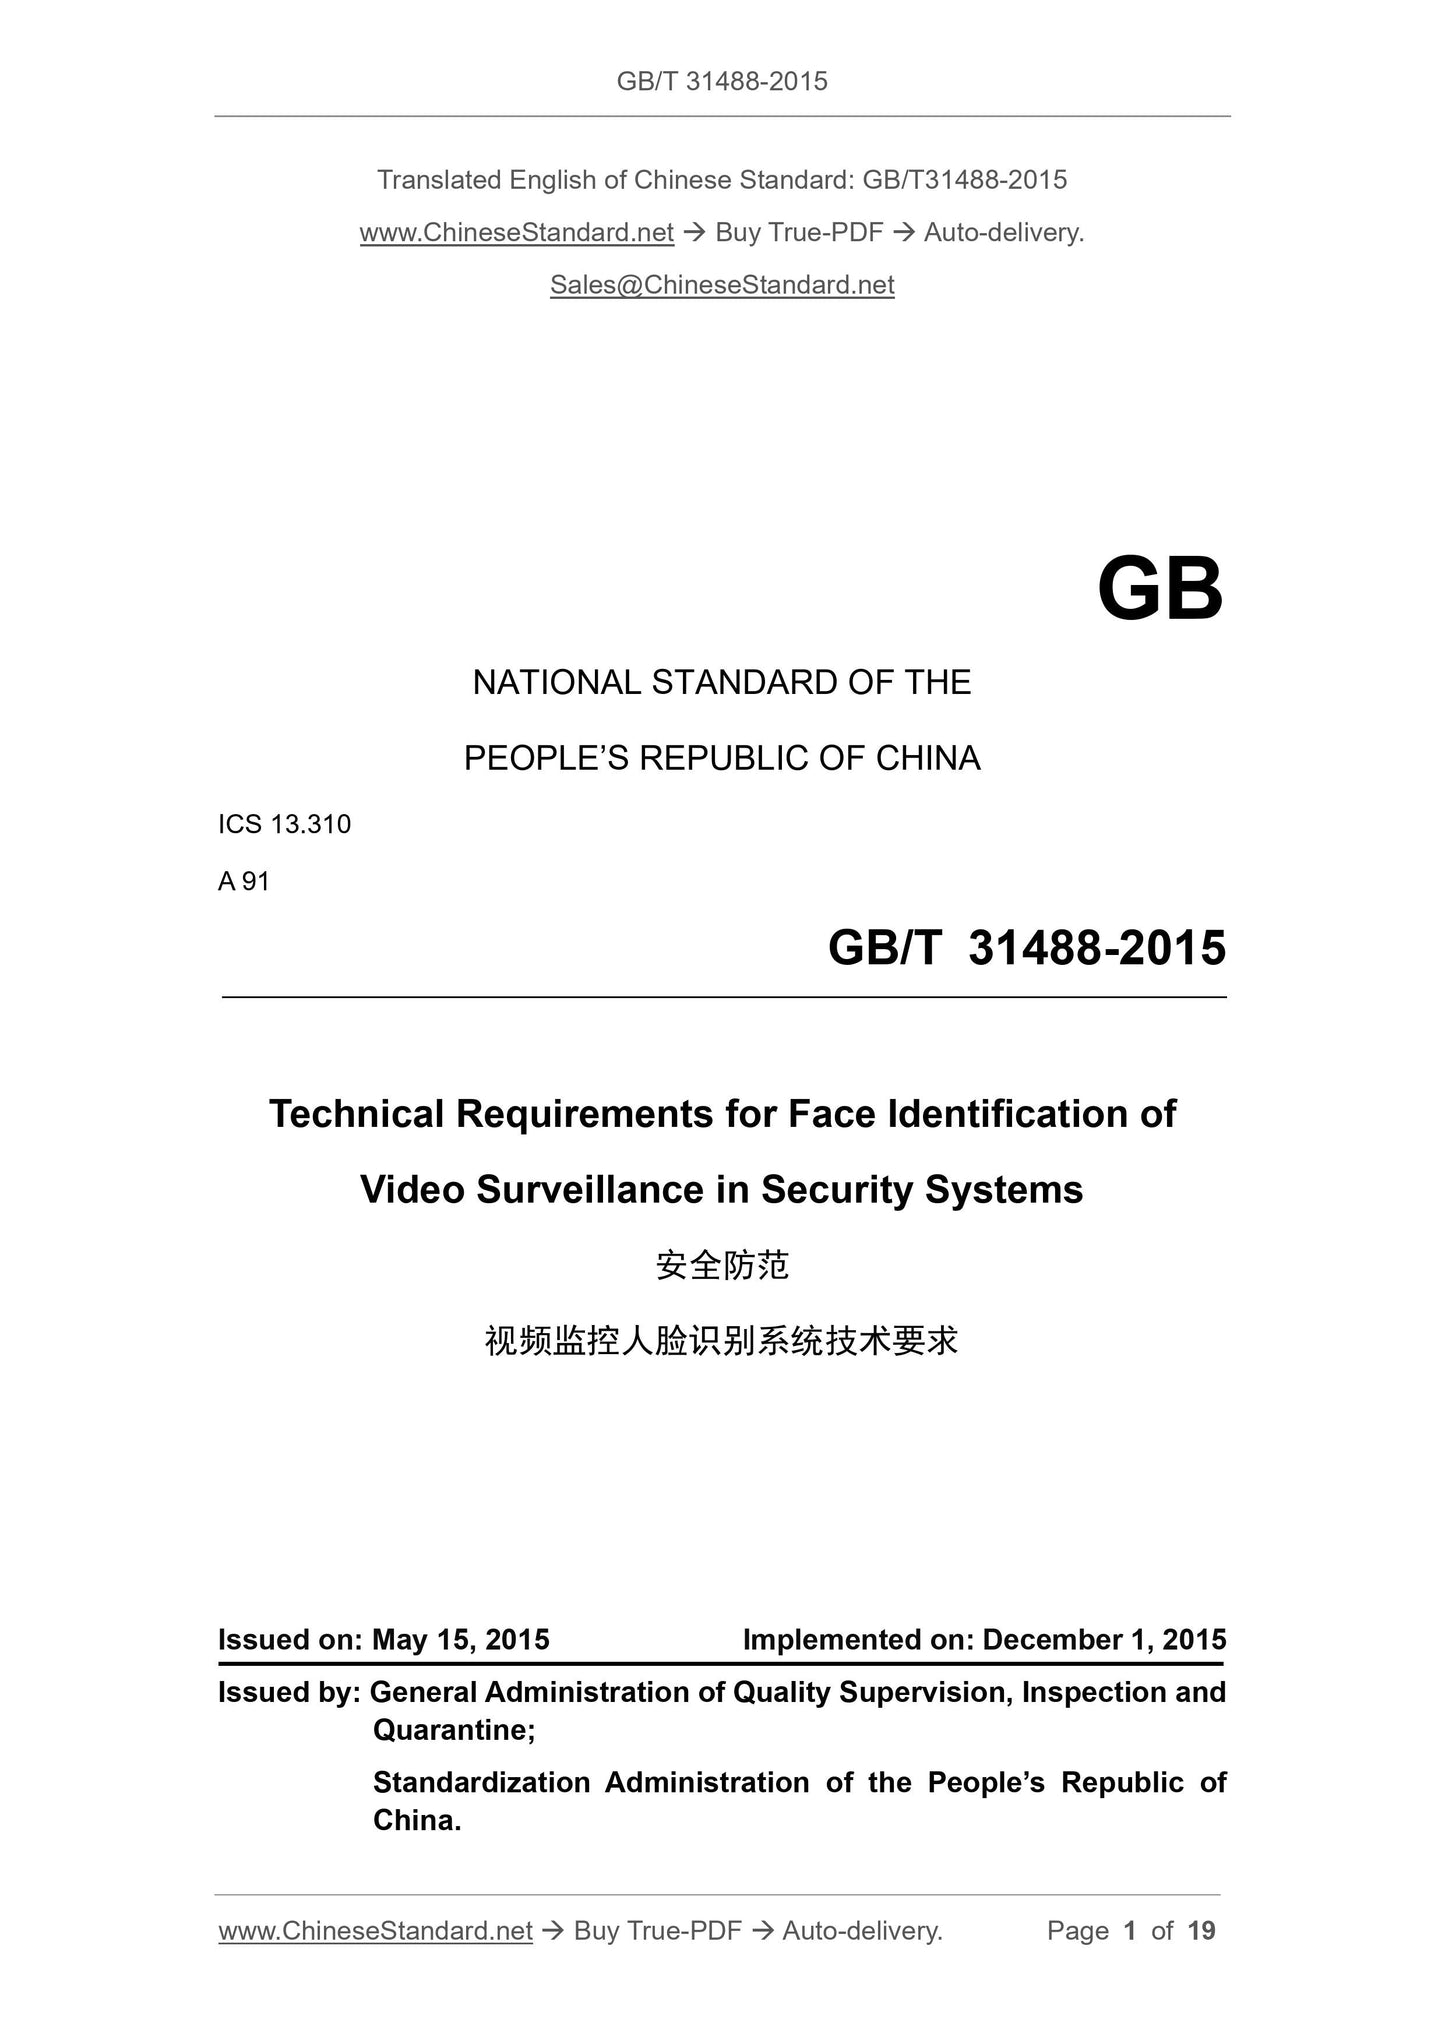 GB/T 31488-2015 Page 1